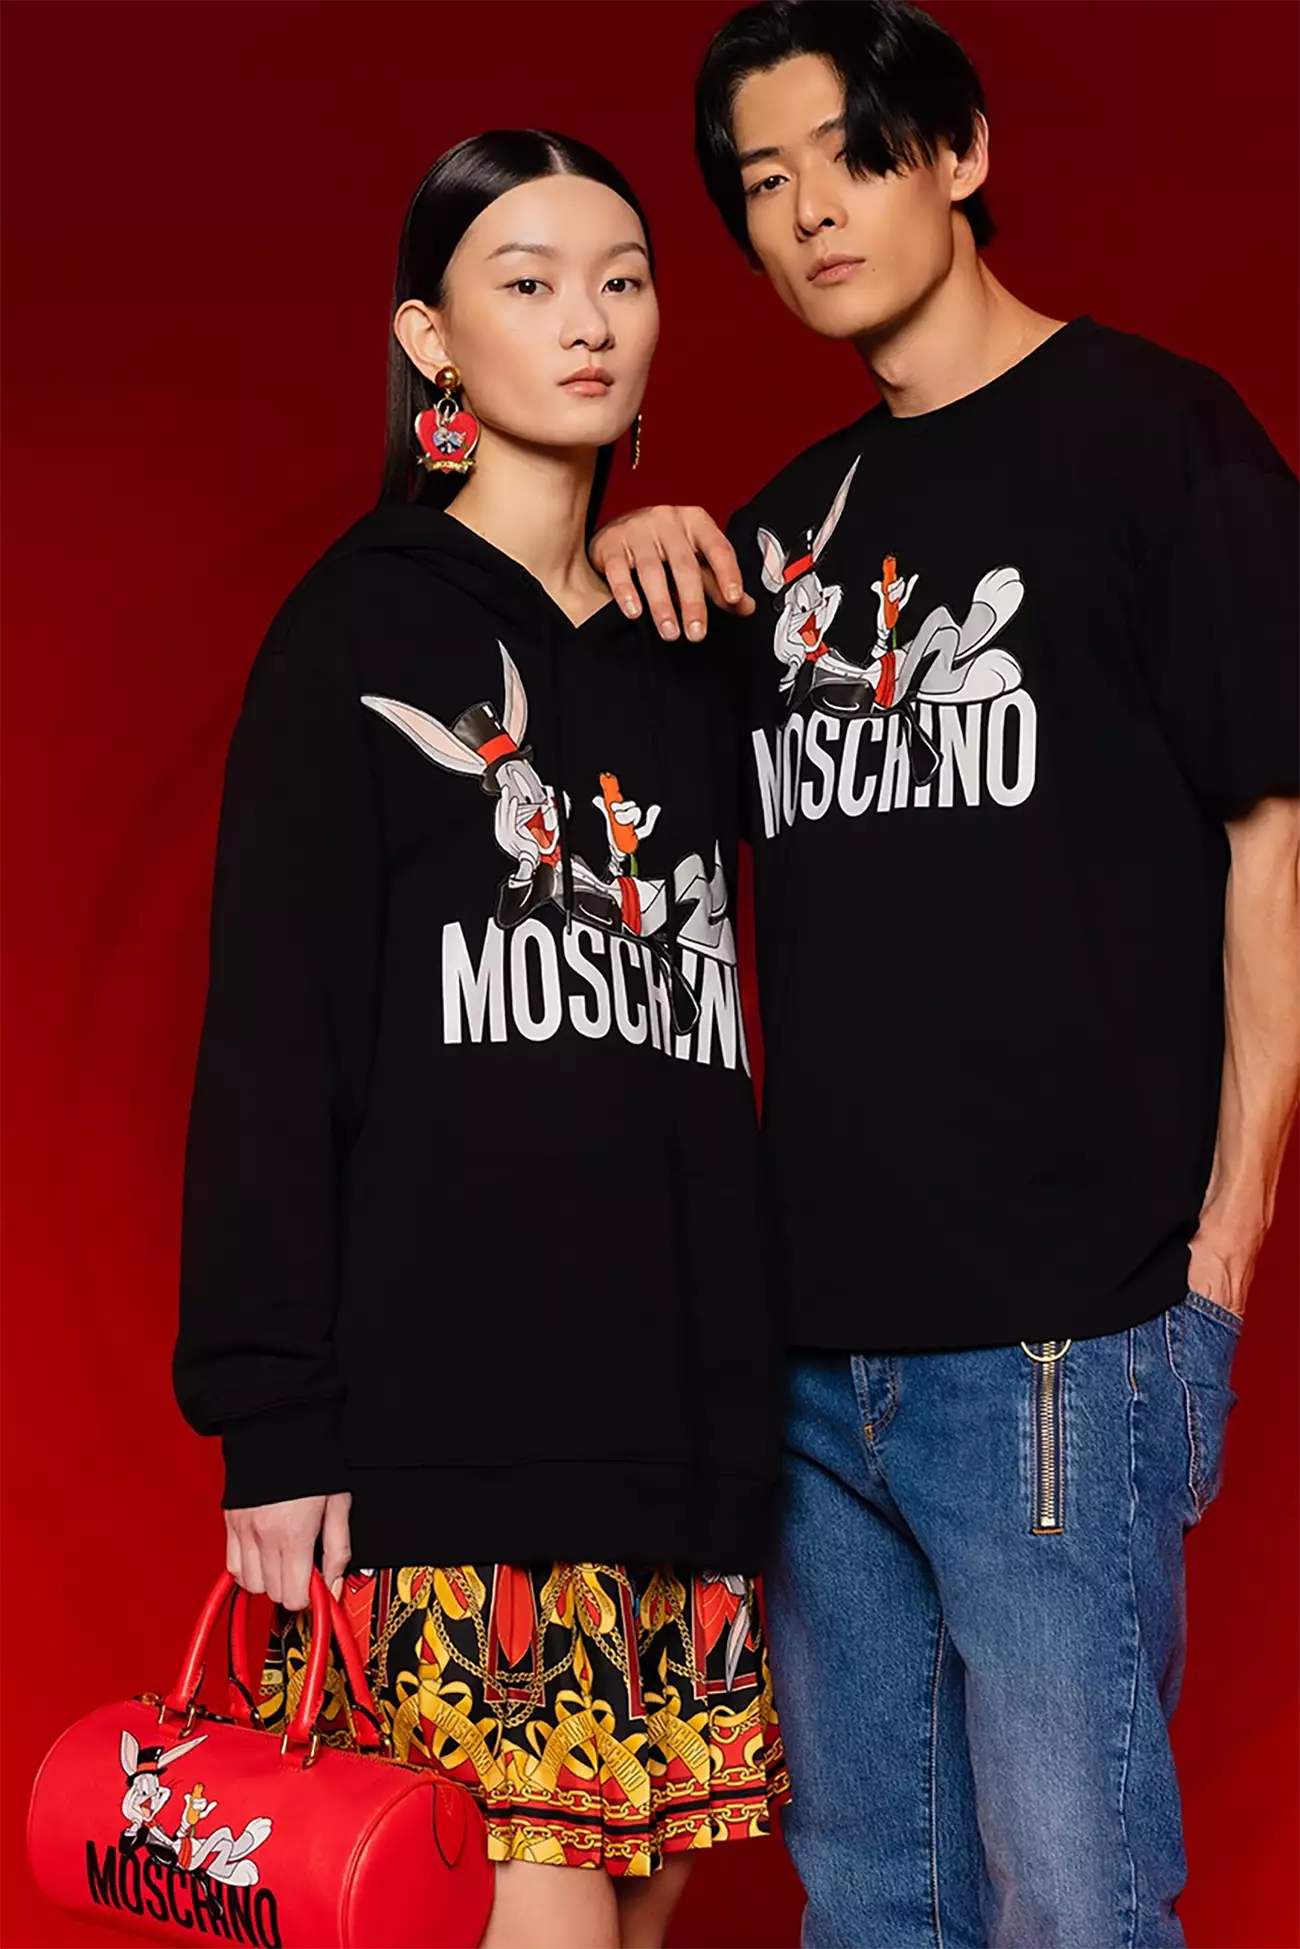 Moschino taps Bugs Bunny for Lunar New Year 2023 capsule